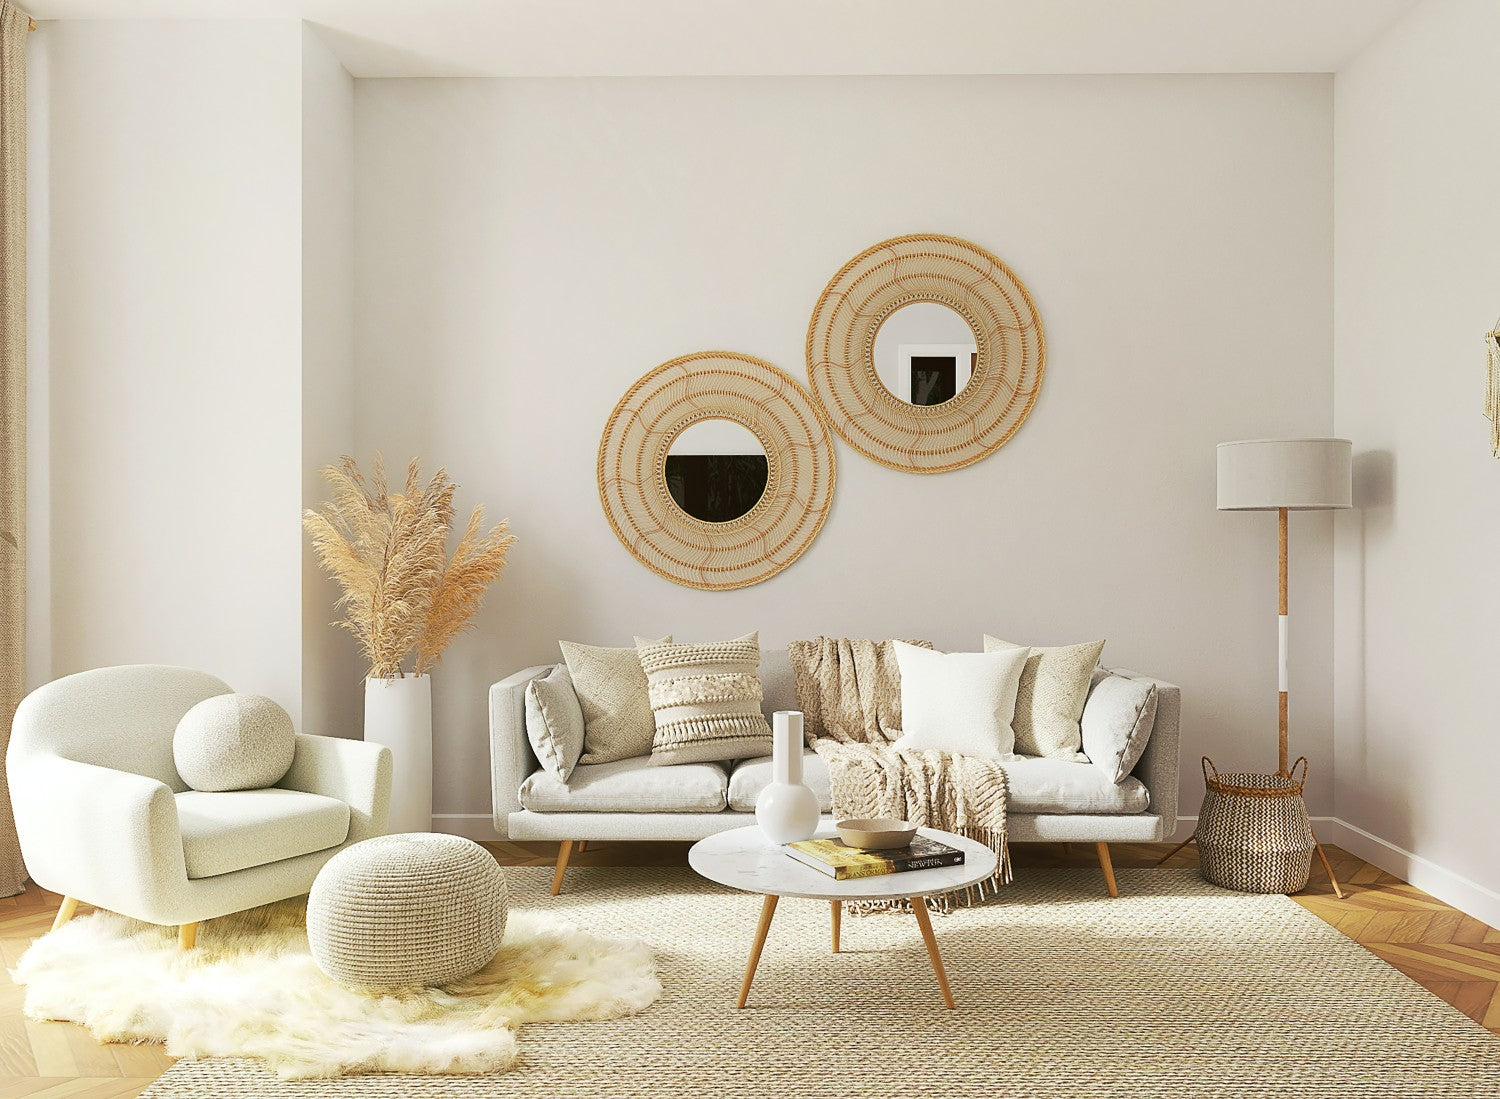 Scandinavian style living area with cream furniture and light wood accents